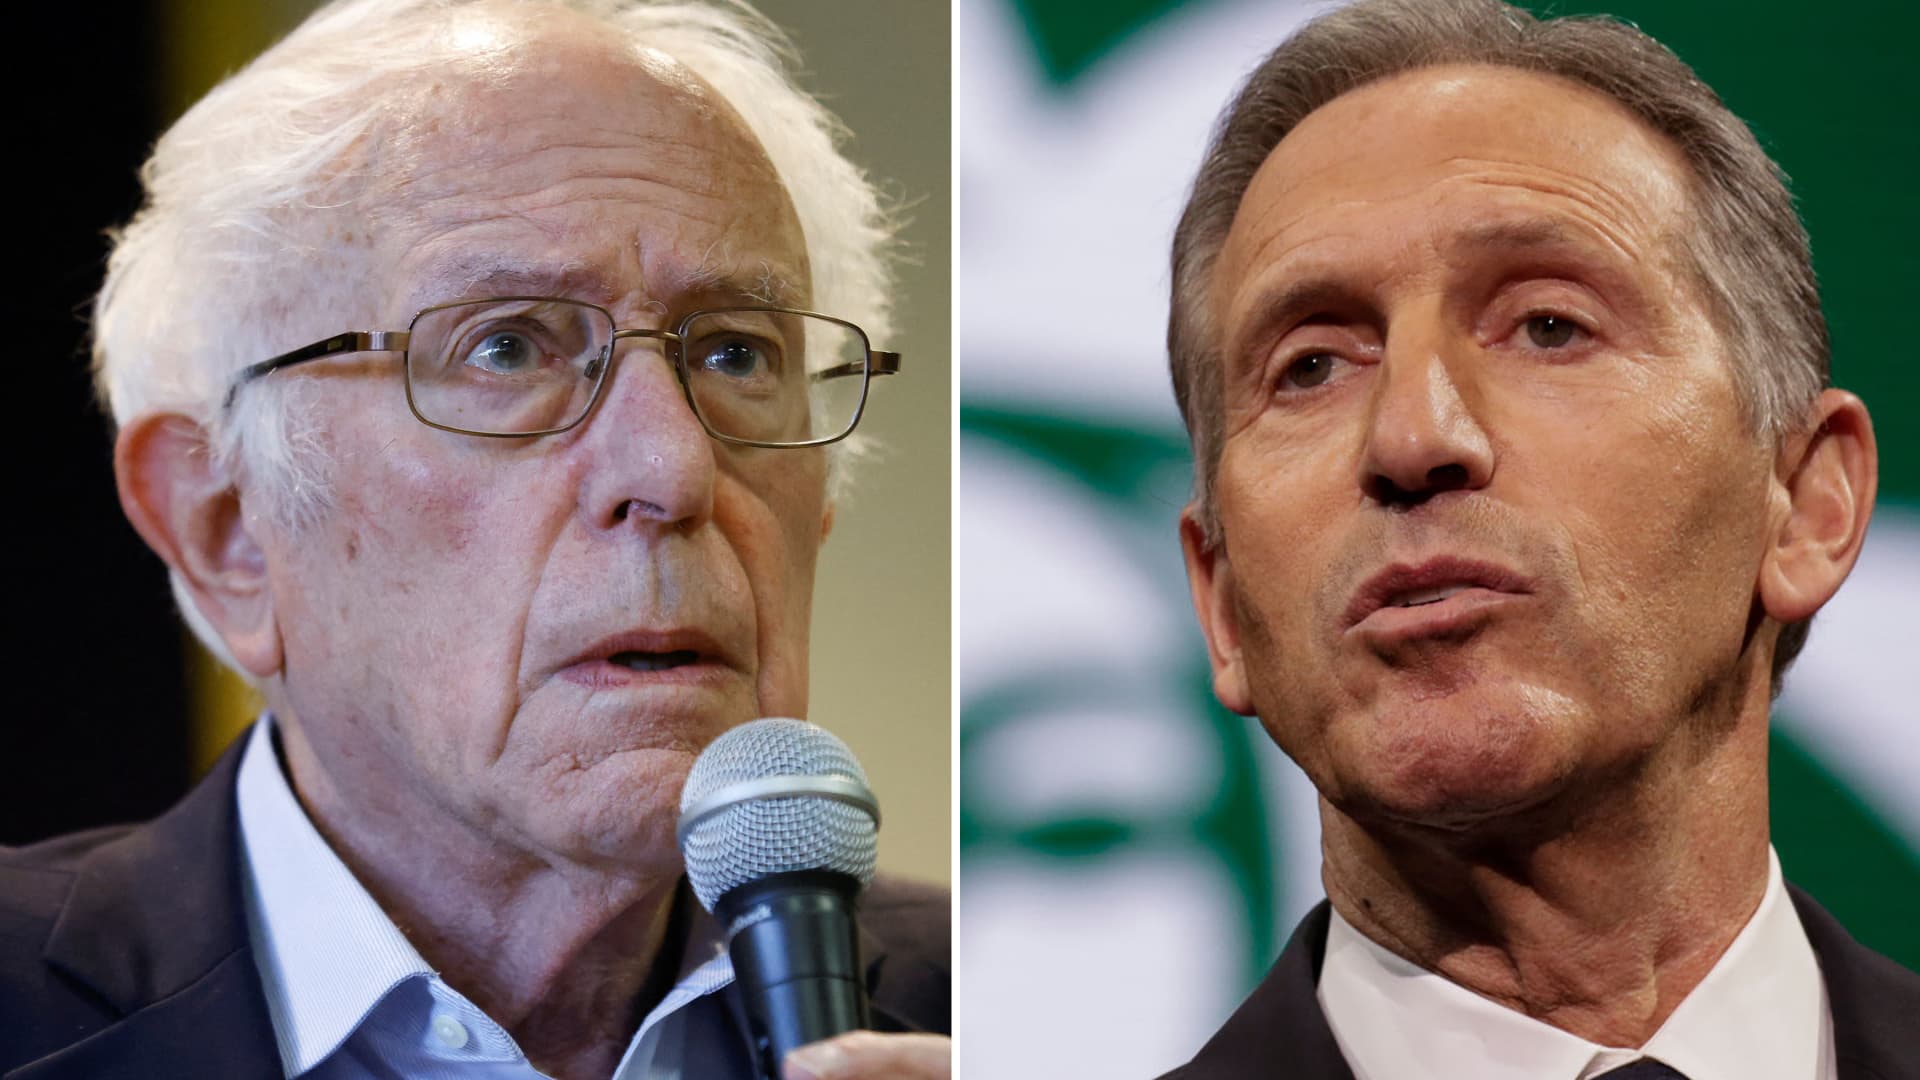 Starbucks CEO Howard Schultz agrees to testify at Senate hearing after subpoena threat